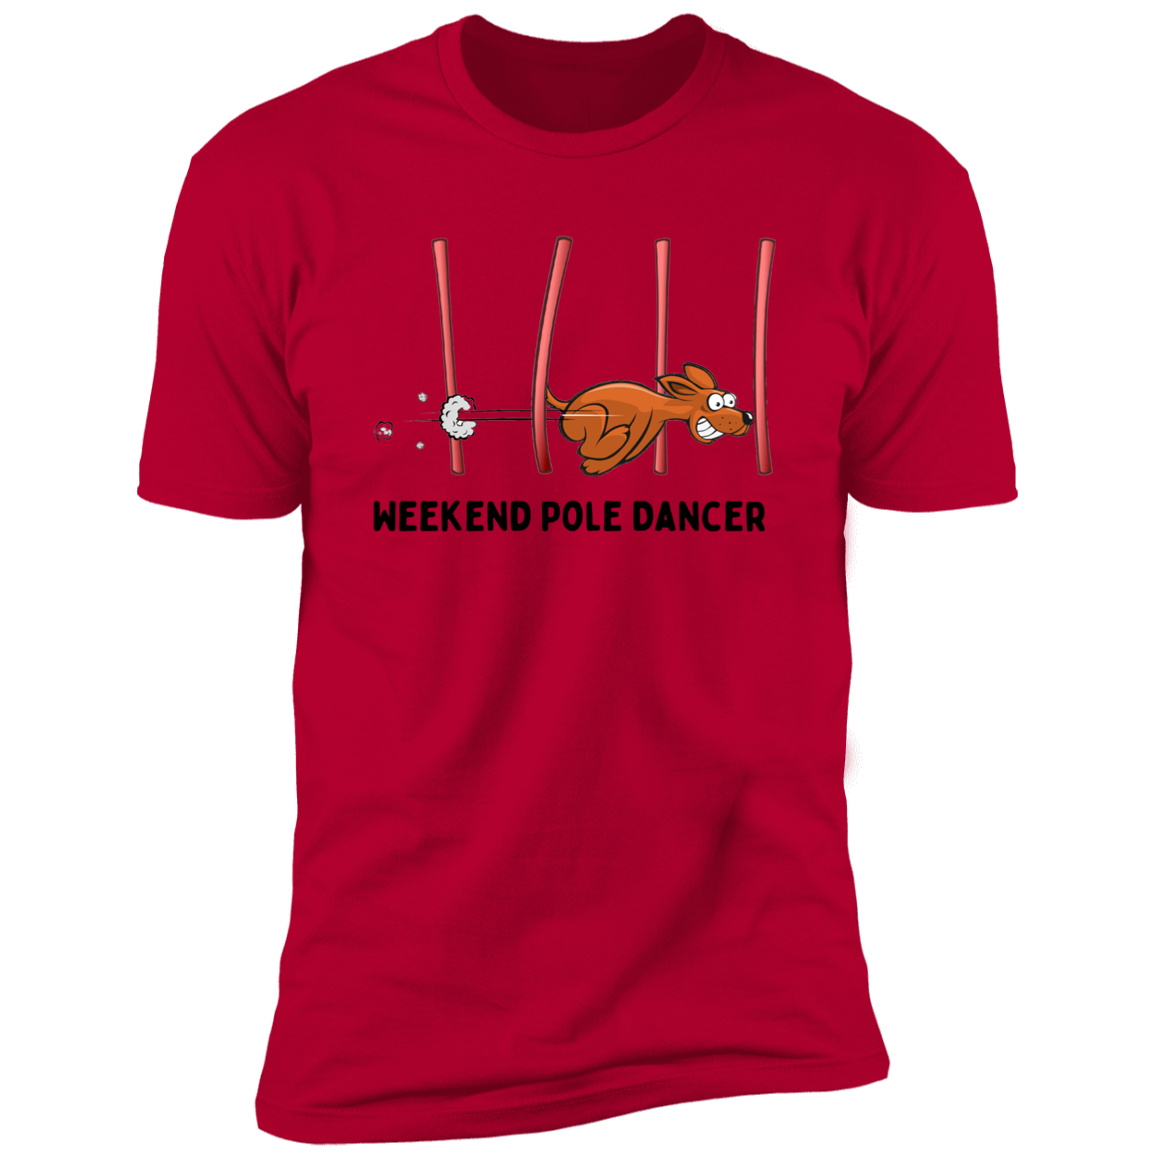 Weekend Pole Dancer Dog Agility T-Shirt, dog shirt for humans, sporting dog shirt, agility dog shirt, in red